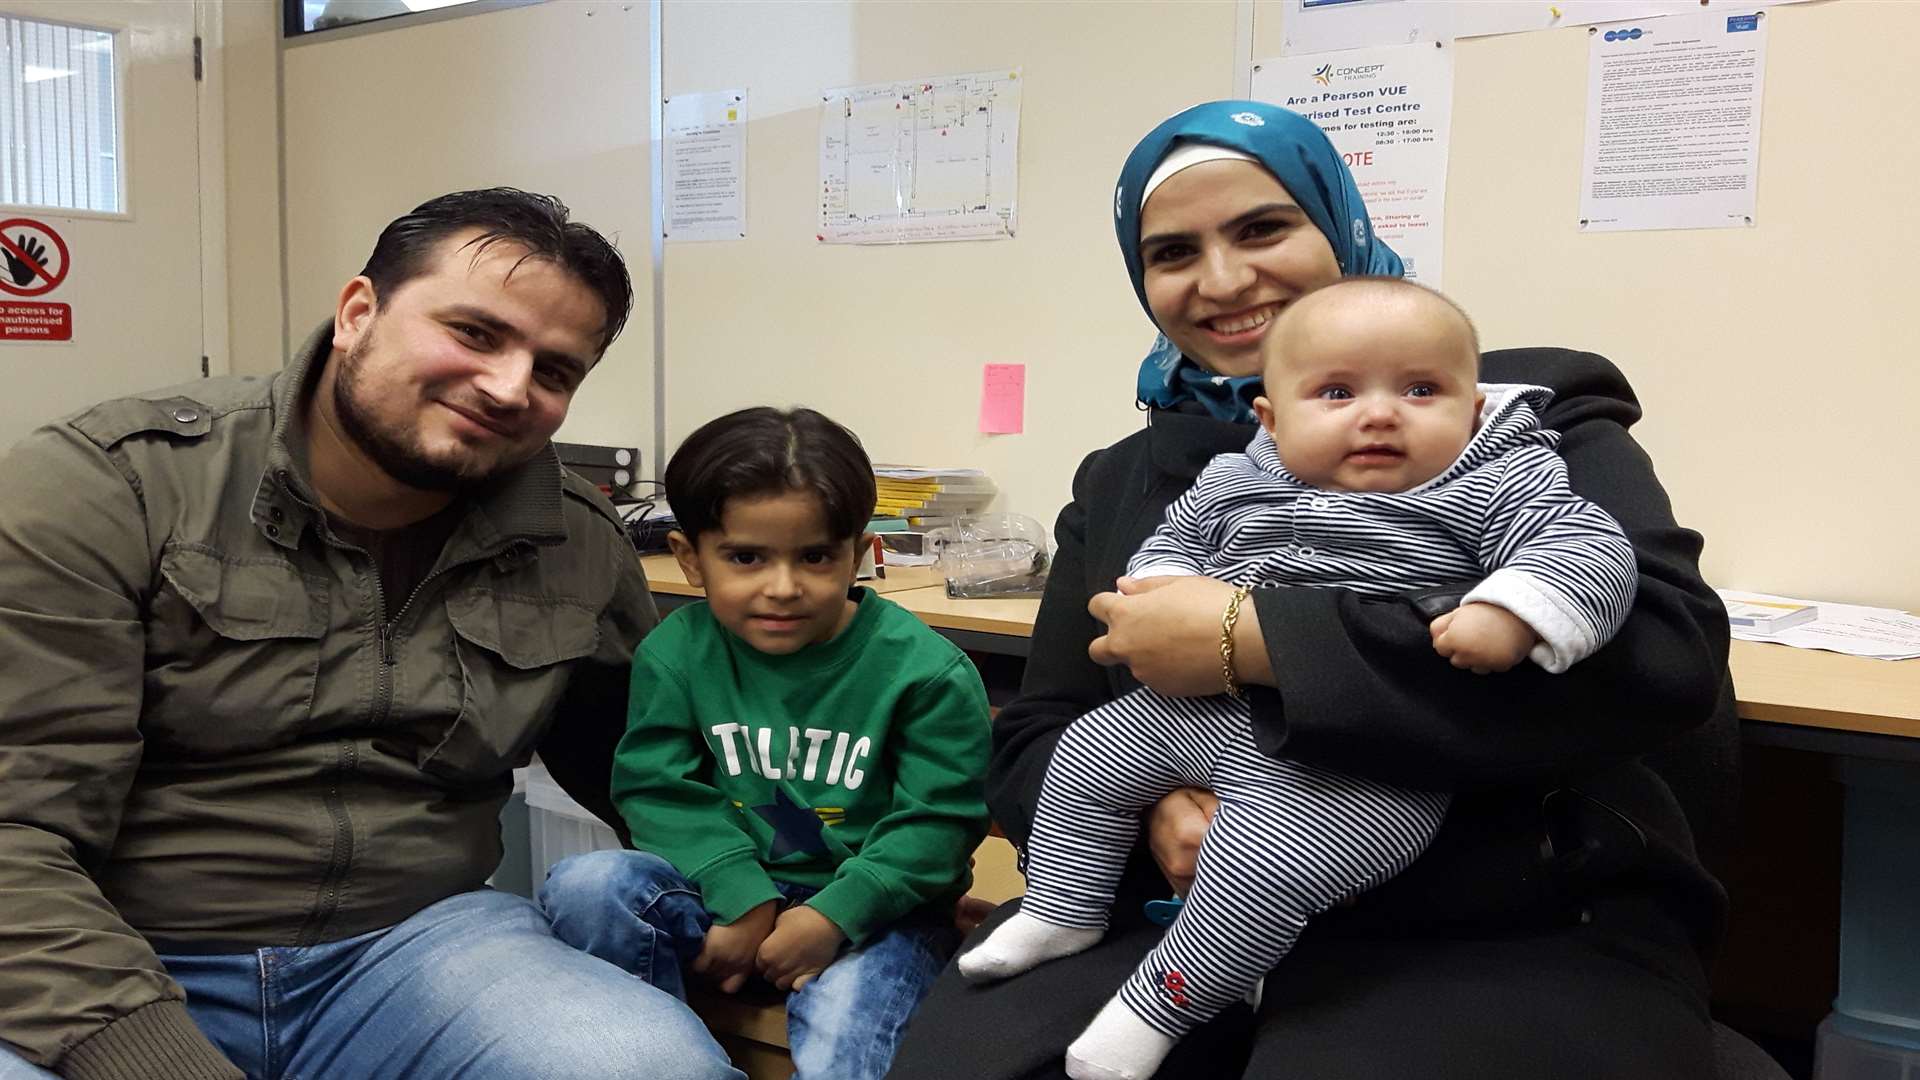 Syrian refugees Ismaeil Ismaeil with his son Rida, and his wife Jamila Nabolsi with her baby son Rital